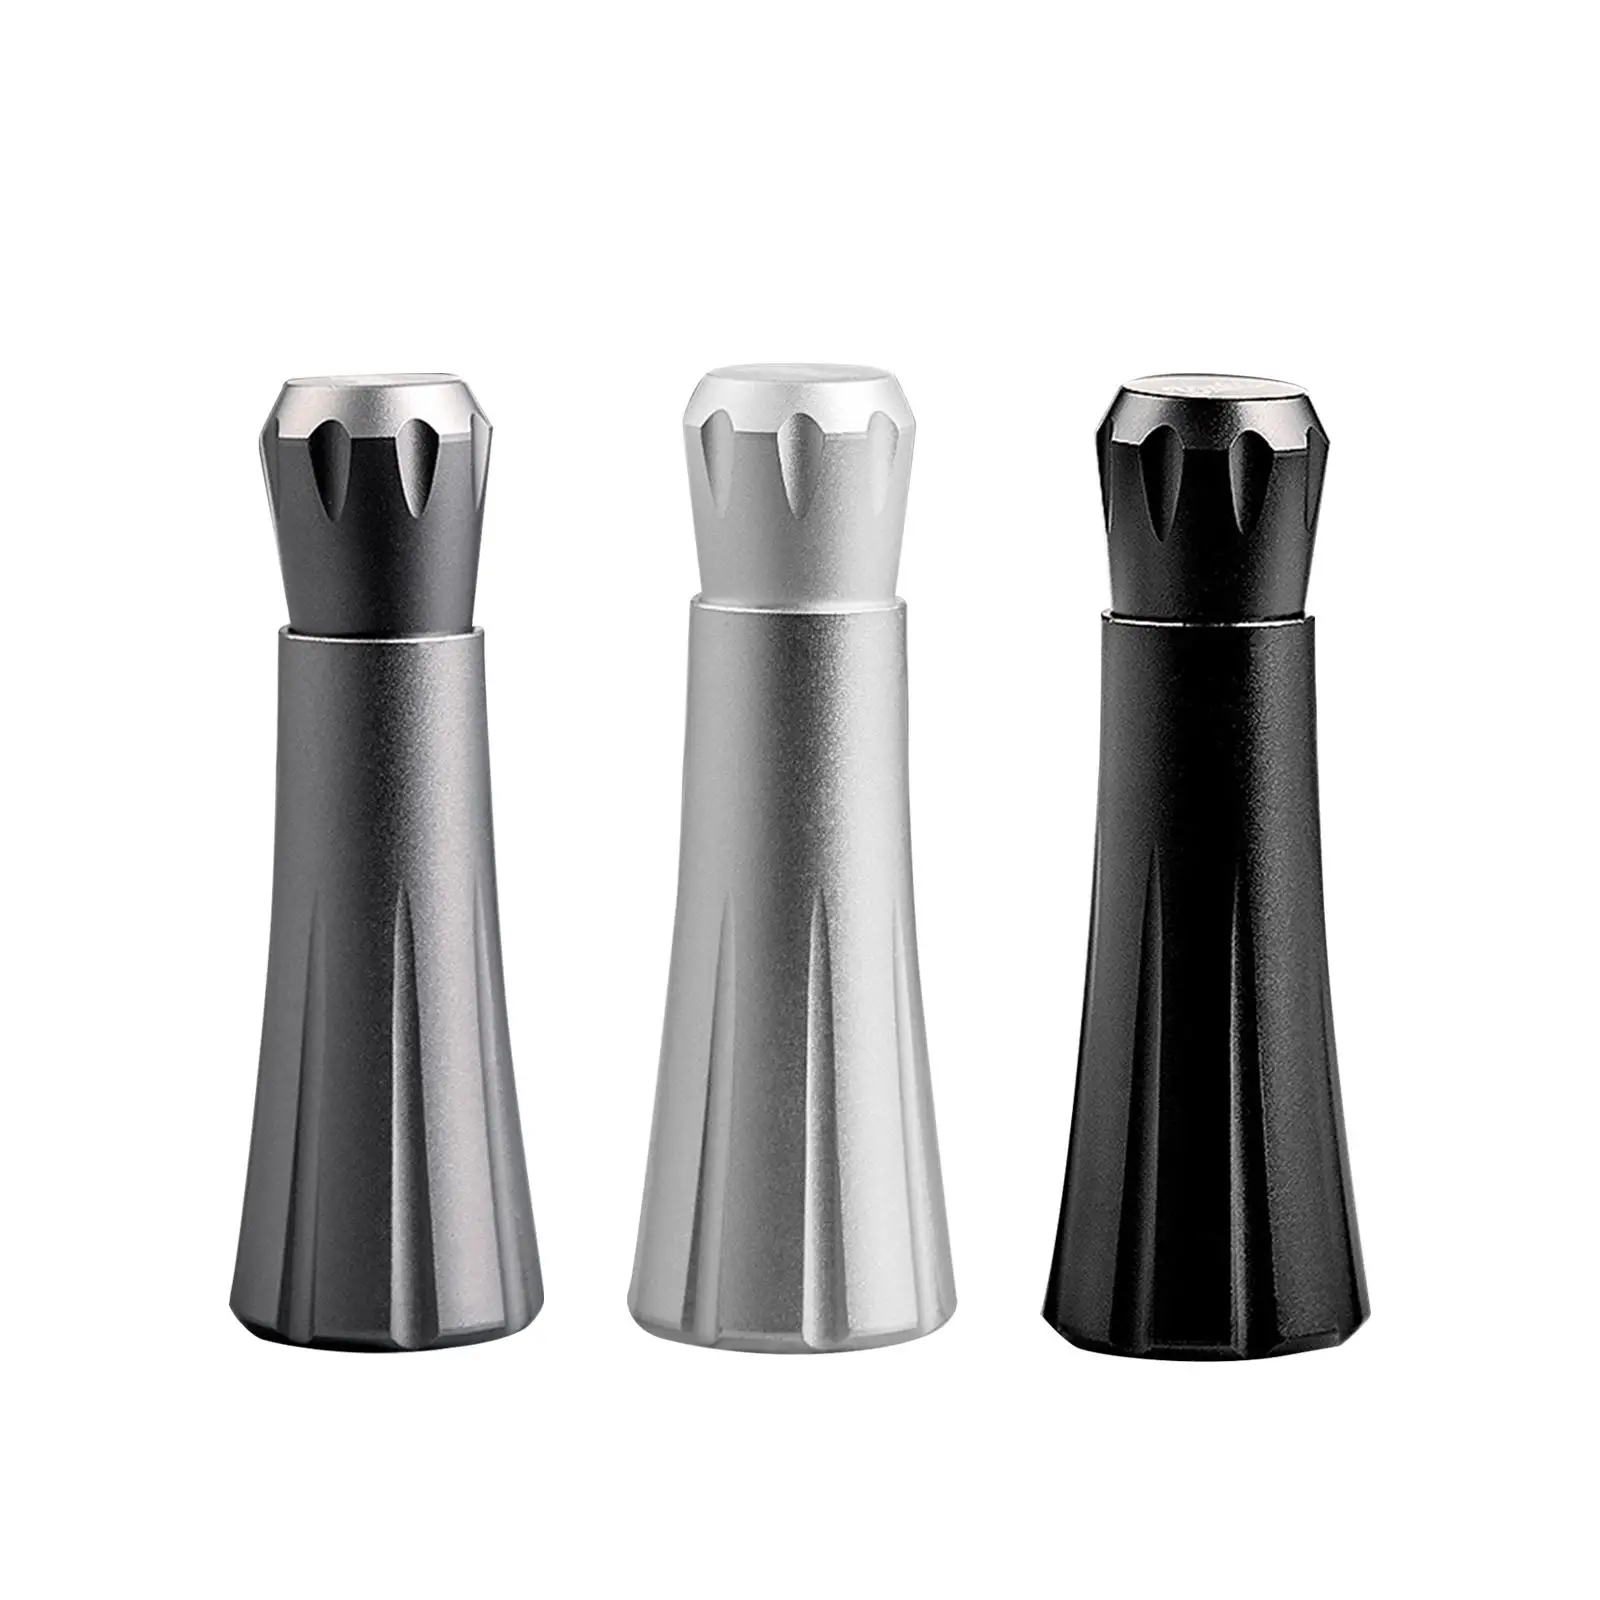 Coffee Stirring Tamper Coffee Stirrer with Stand Espresso Tools Type Distributor for Shop Office Travel